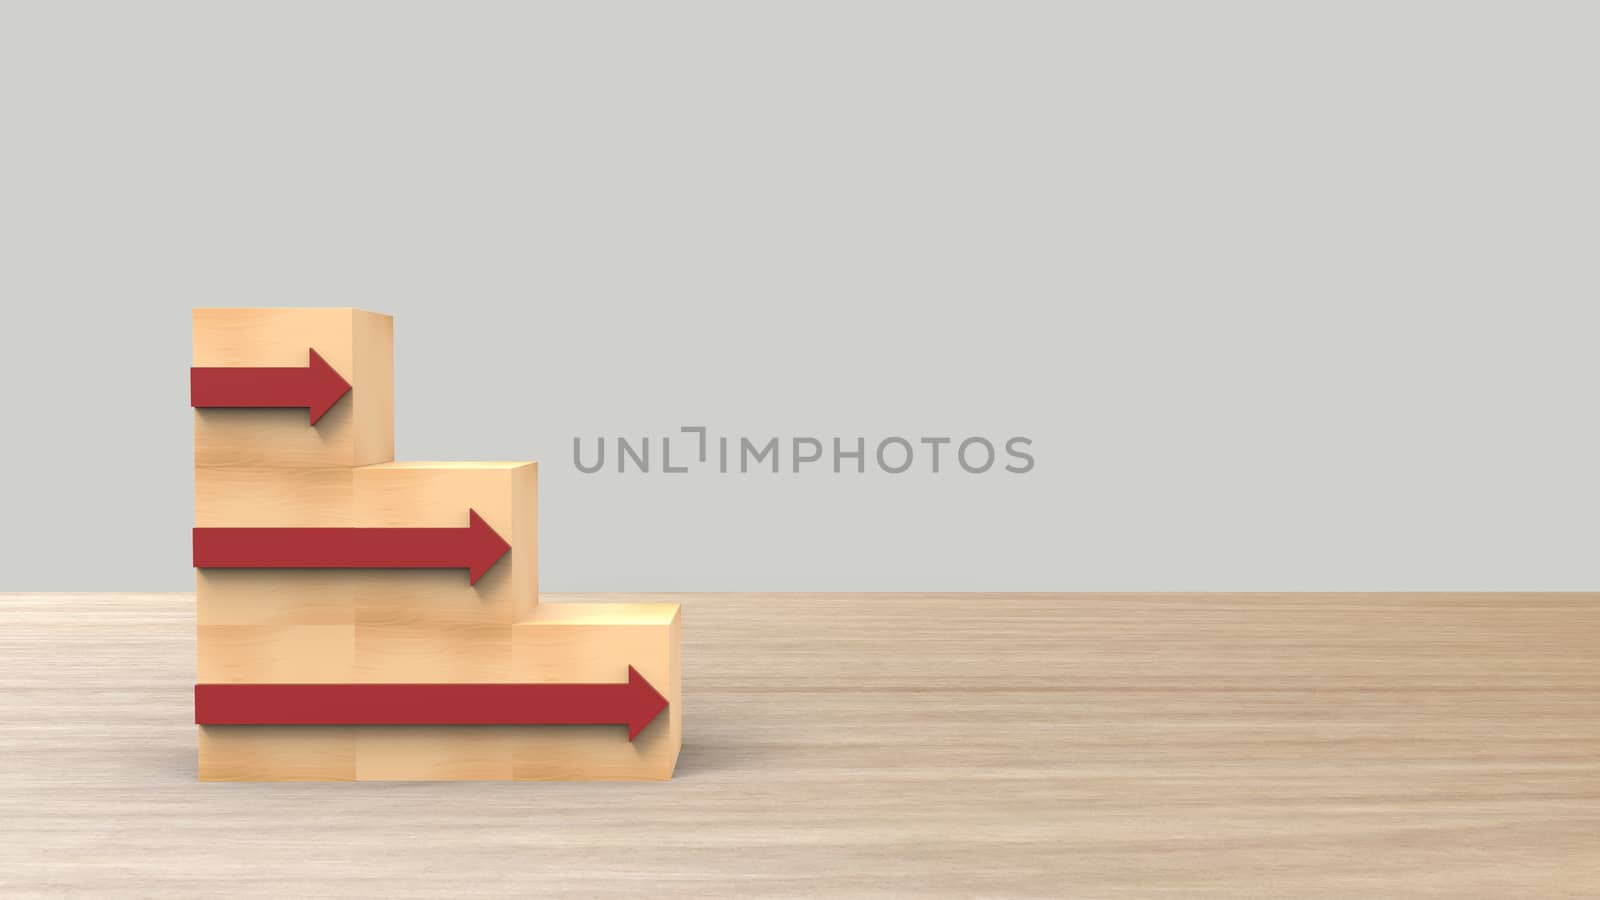 wood block stacking as left stair with red arrow right. Ladder career path concept for business growth success process. On wood wooden table with light gray background HD. Render 3d illustration by Andreajk3